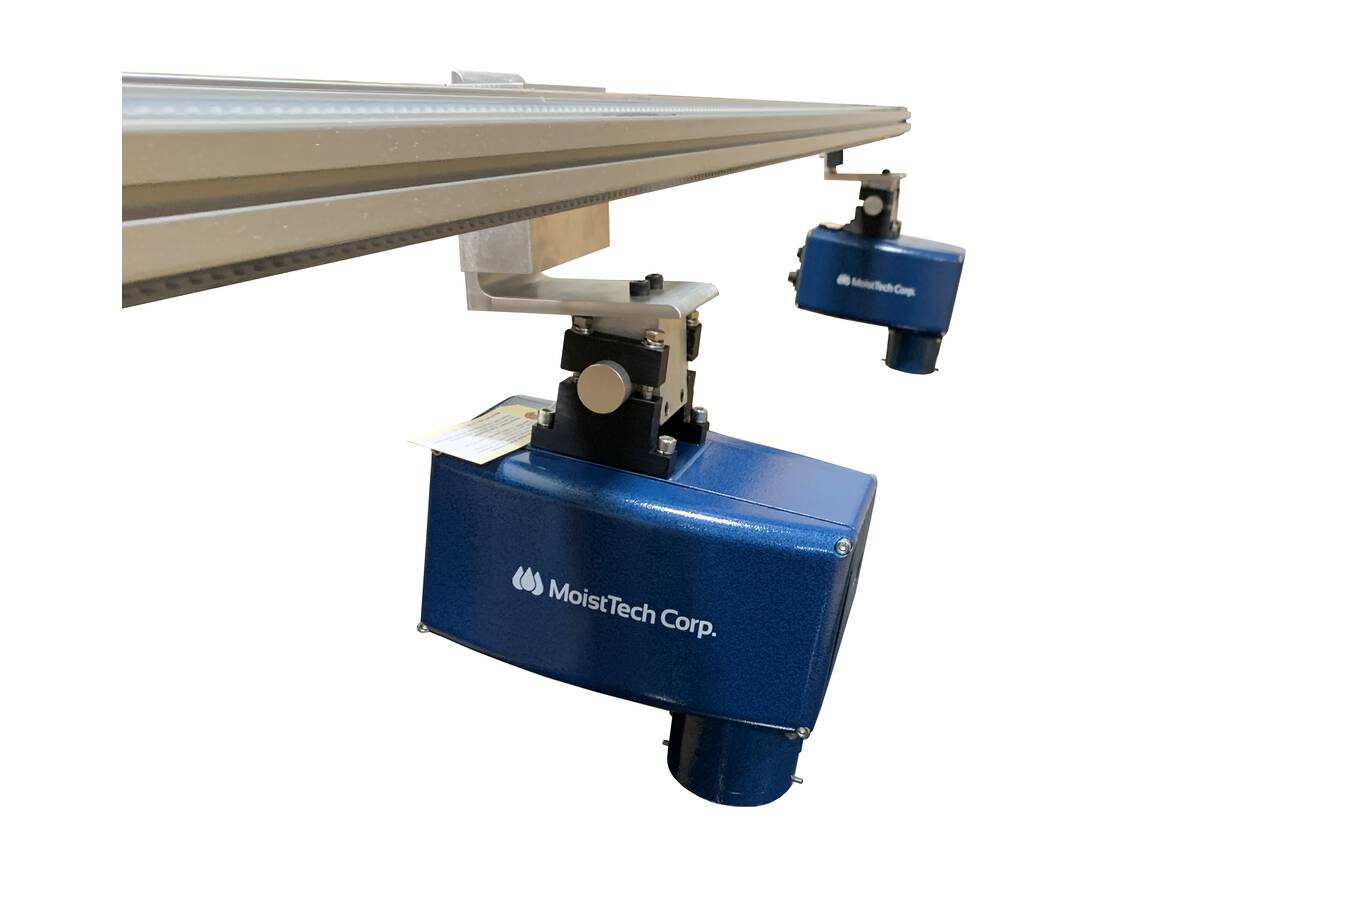 MoistTech Provides Slide Systems to Increase Productivity The linear slide  is specifically designed to traverse the moisture sensor across the web to obtain a full spectrum of the products moisture and / or coating thickness. 